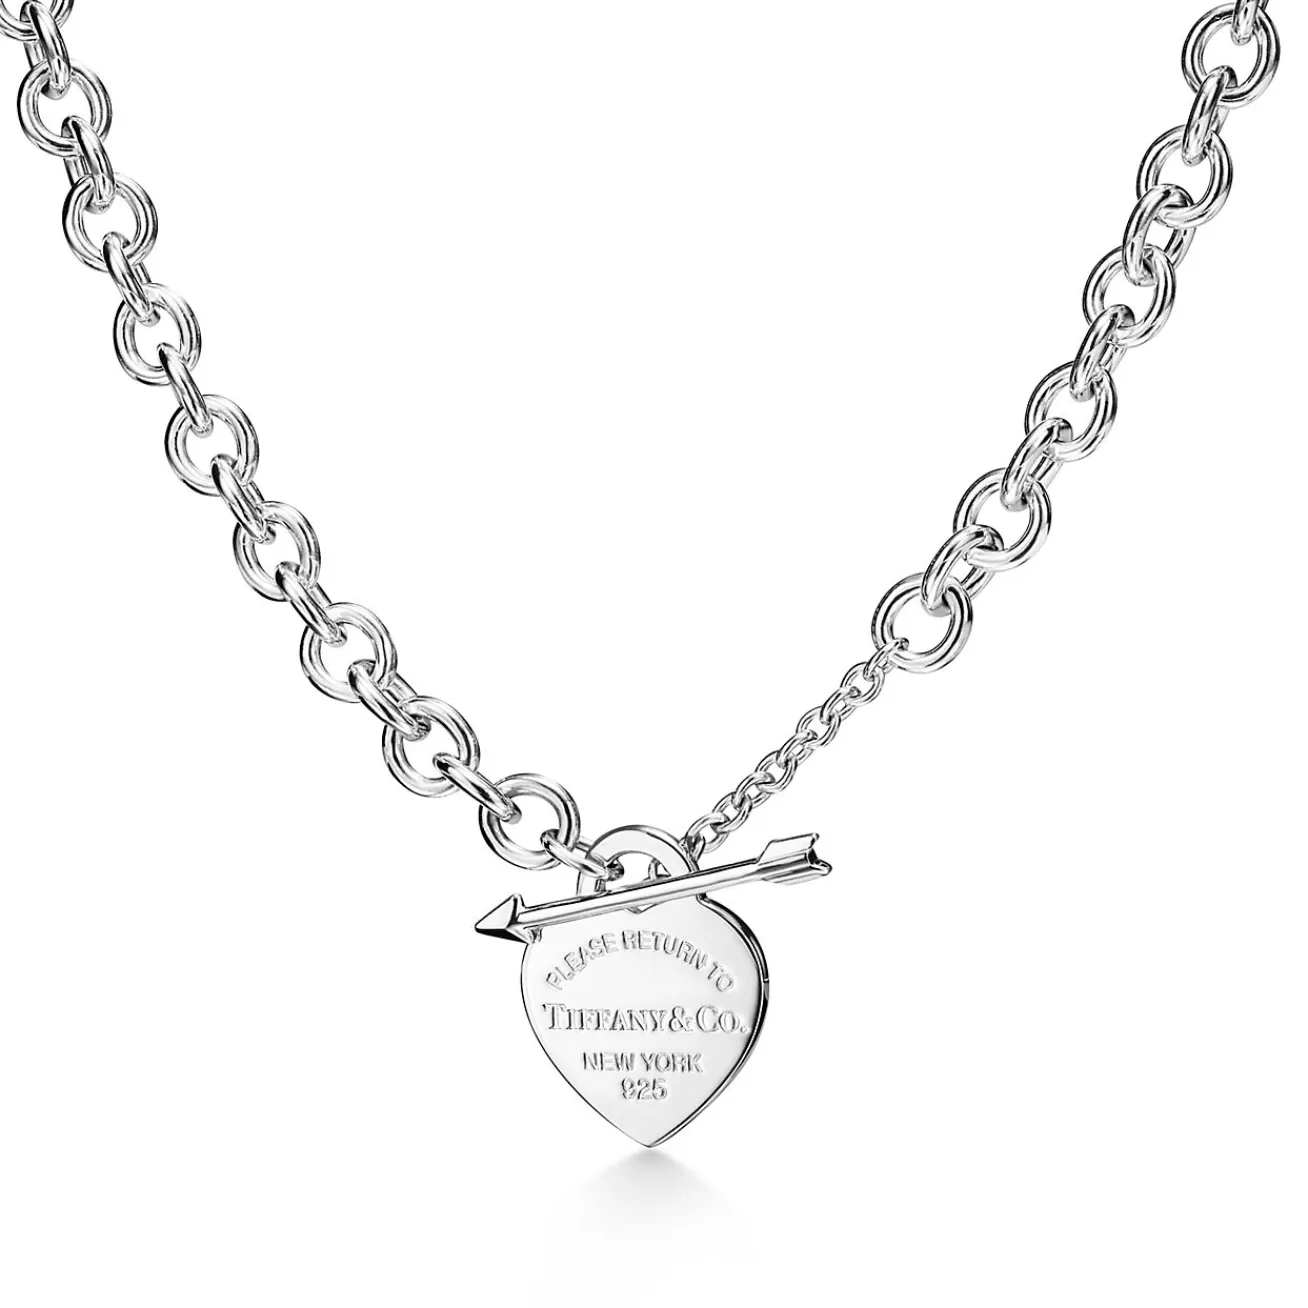 Tiffany & Co. Return to Tiffany® Lovestruck Heart Tag Necklace in Silver, Medium | ^ Necklaces & Pendants | Gifts for Her